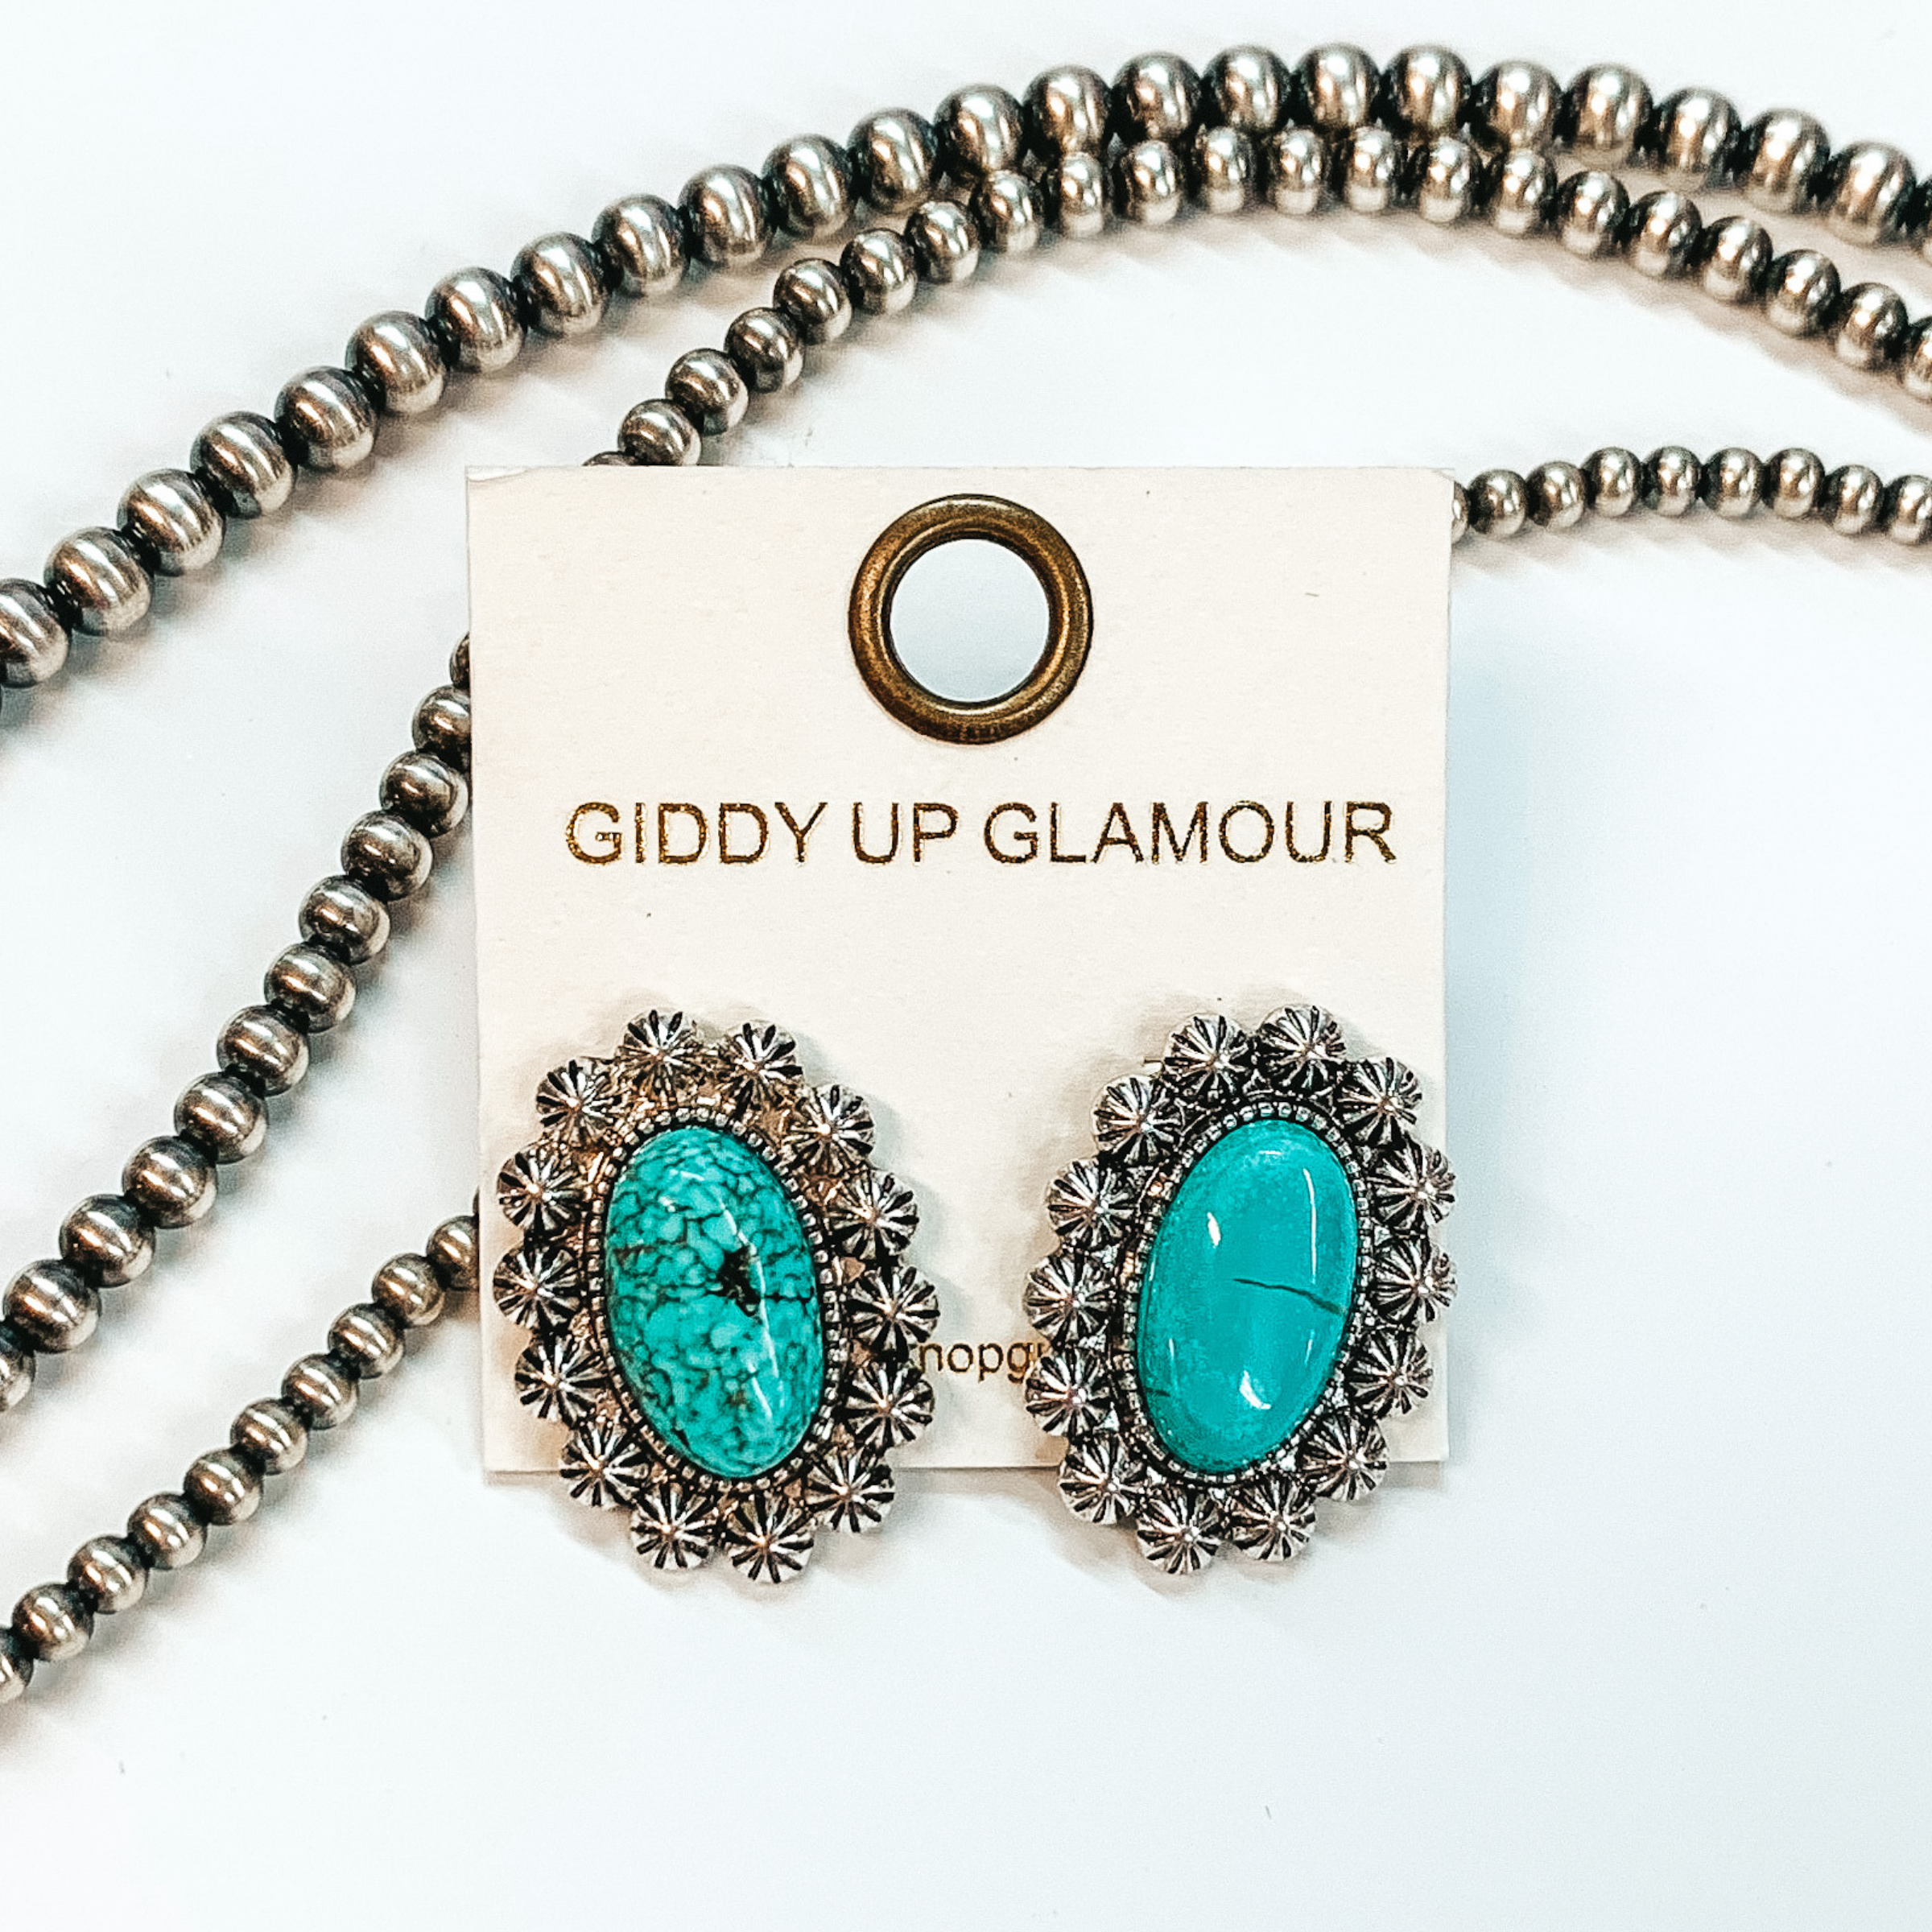 Shown here are post back earrings with a turquoise stone in the center with silver lining with engraved details. Taken in a white background with beads as decor.